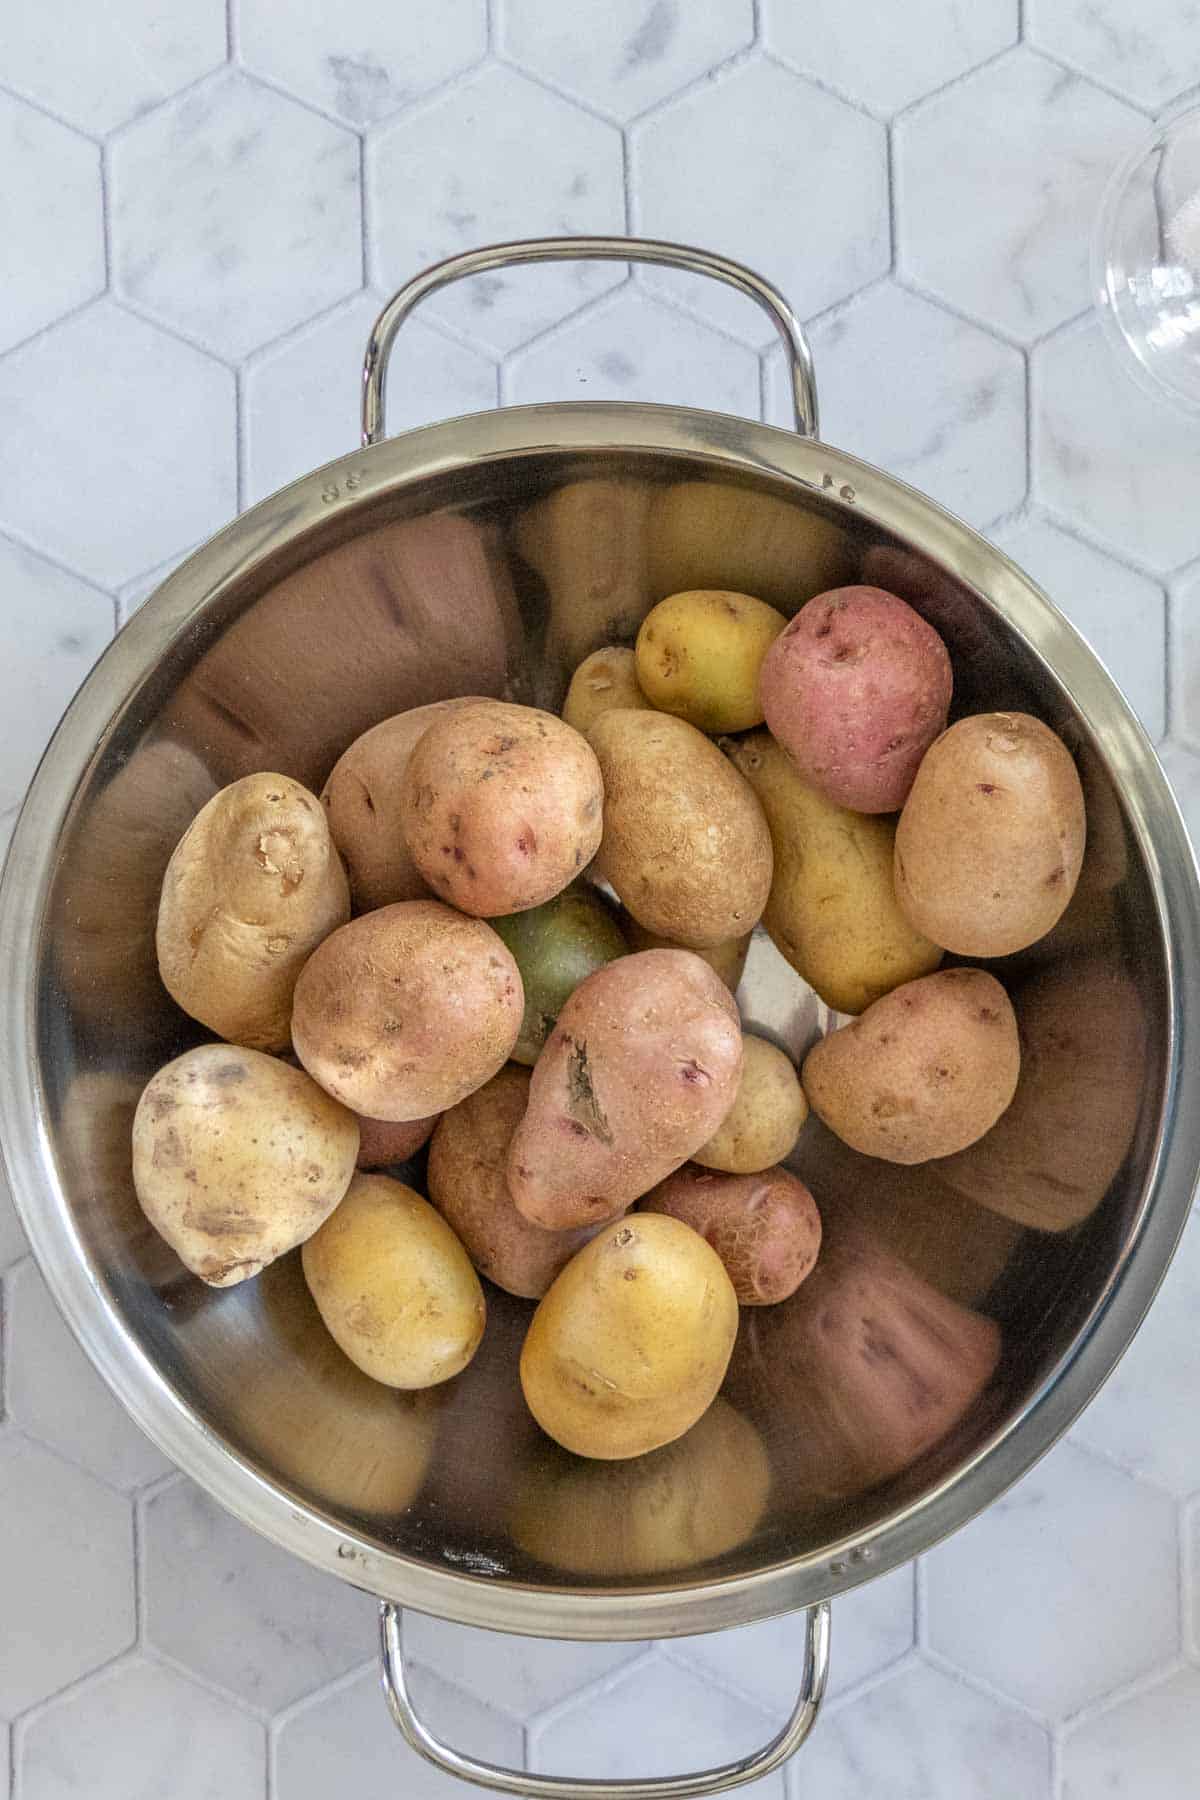 A stainless steel pot containing raw, unpeeled potatoes of various colors on a marble countertop.